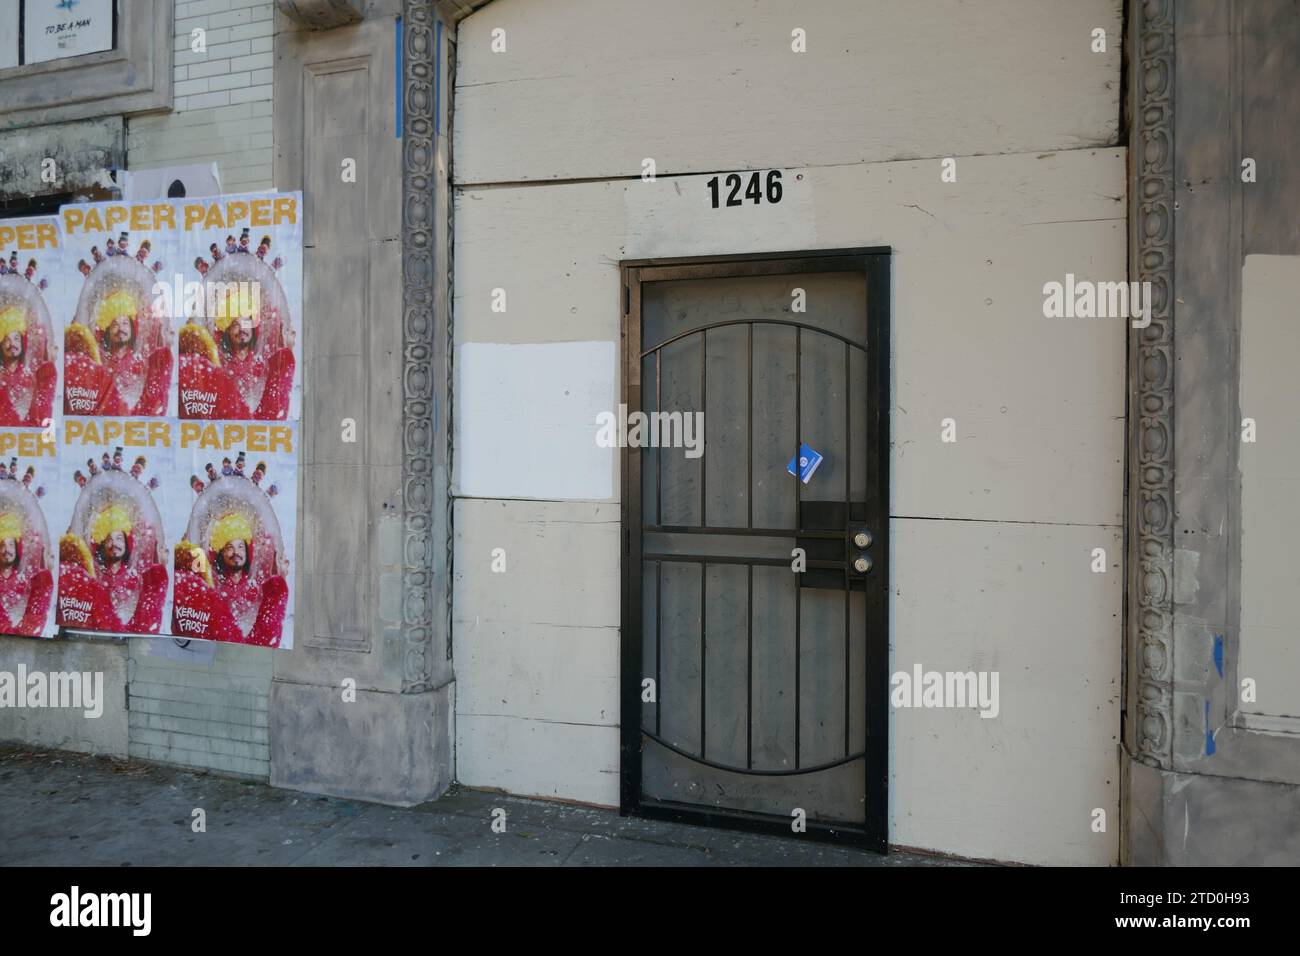 Los Angeles, California, USA 13th December 2023 A general view of The Morrison Hotel where Jim Morrison and the Doors did a photoshoot for their album cover at The Morrison Hotel, now boarded up closed at 1246 South Hope Street on December 13, 2023 in Hollywood, California, USA. Photo by Barry King/Alamy Stock Photo Stock Photo